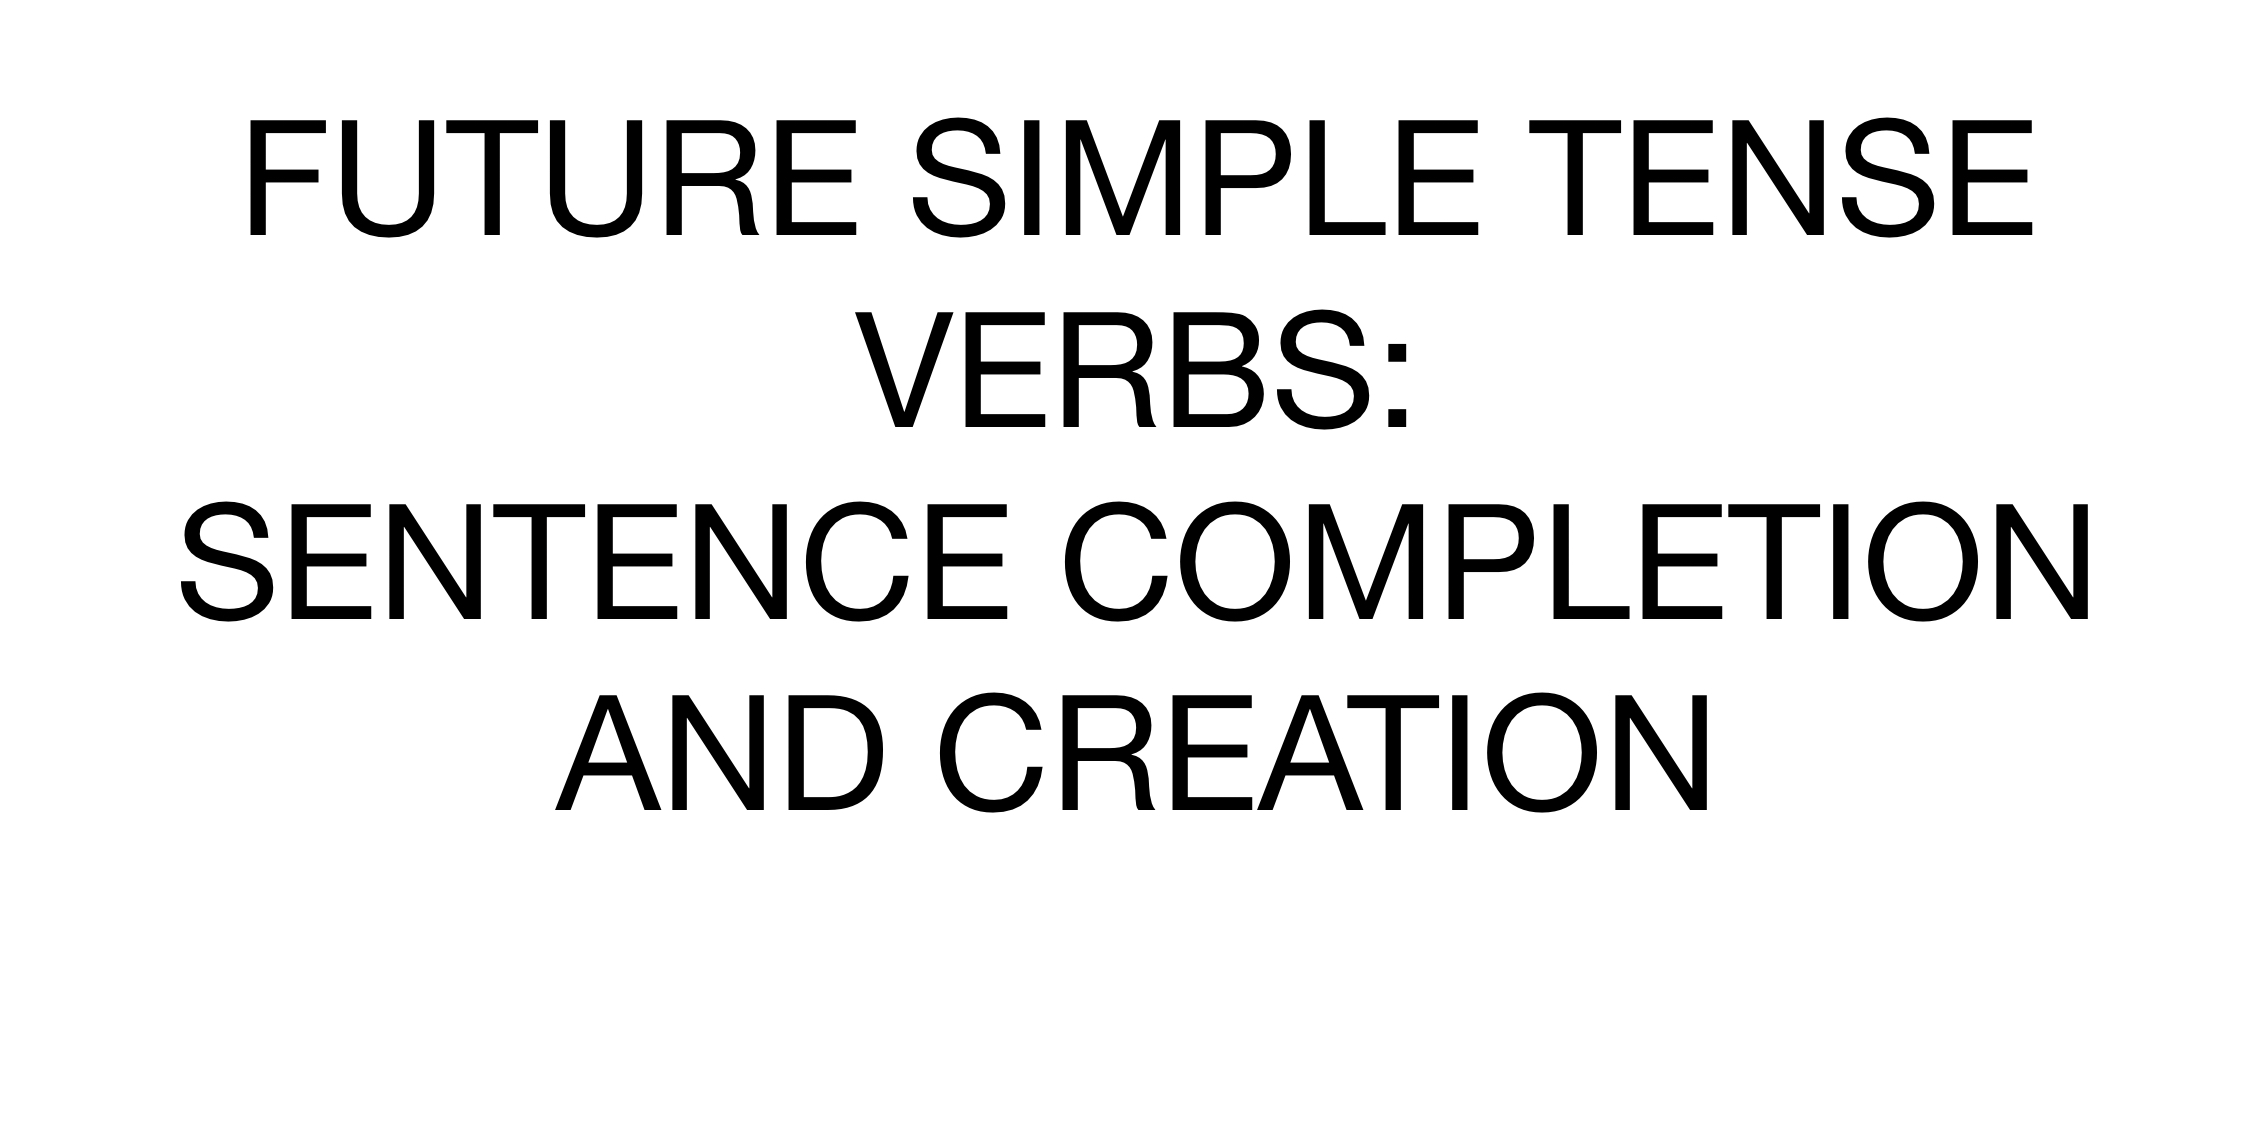 Future Simple Tense Verbs Sentence Completion and Creation image